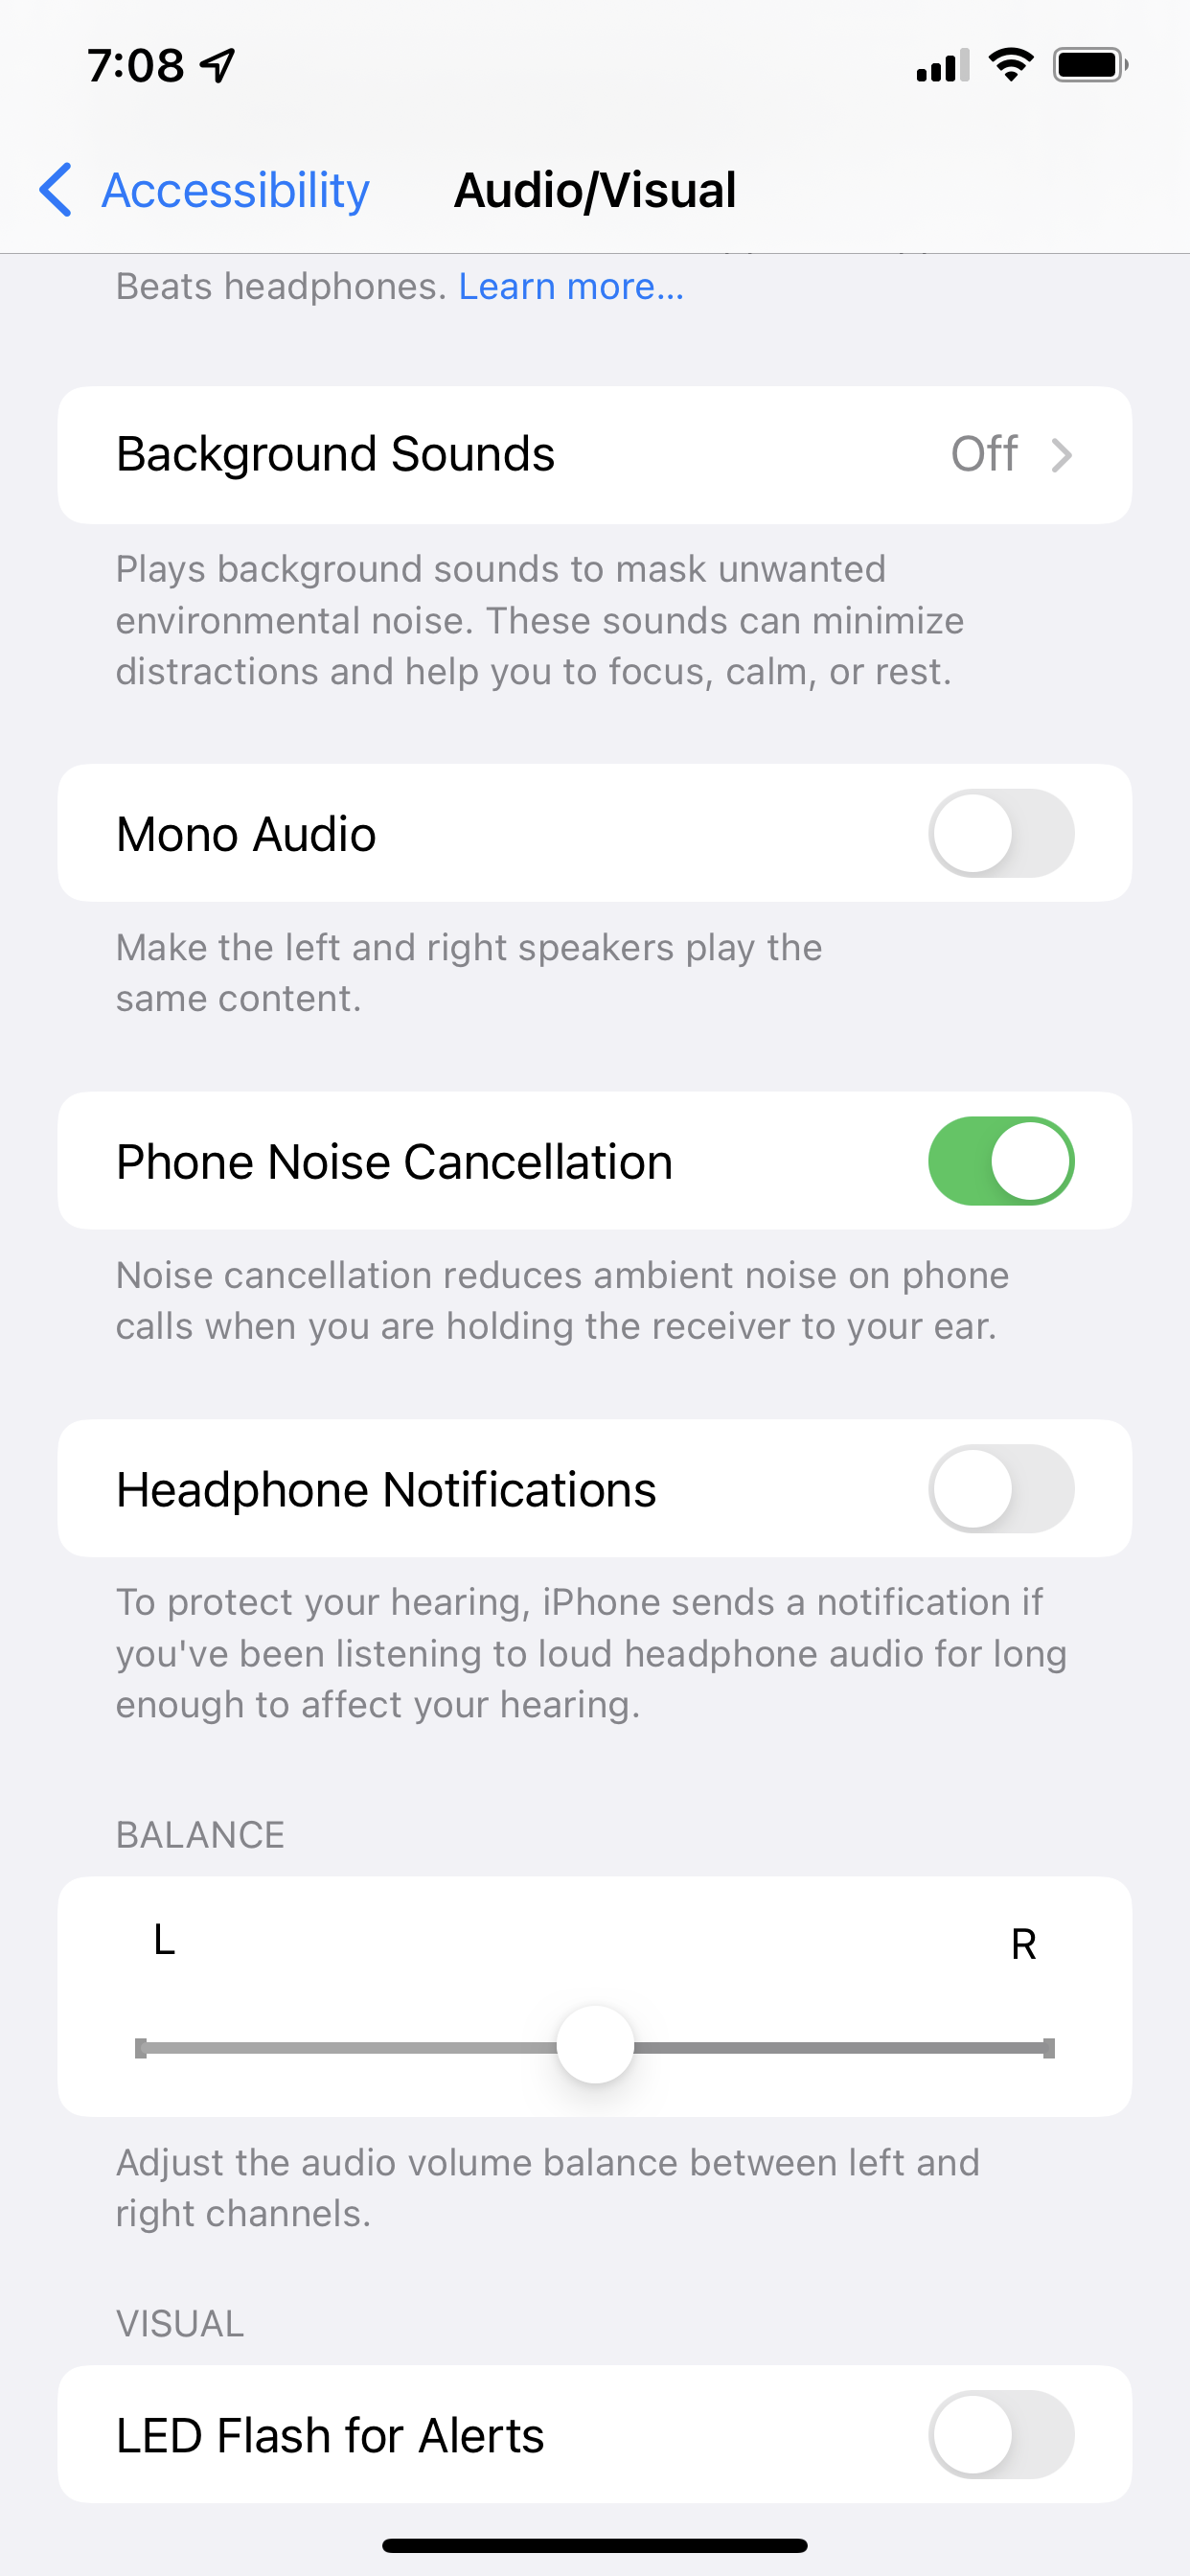 Accessibility settings in iOS.